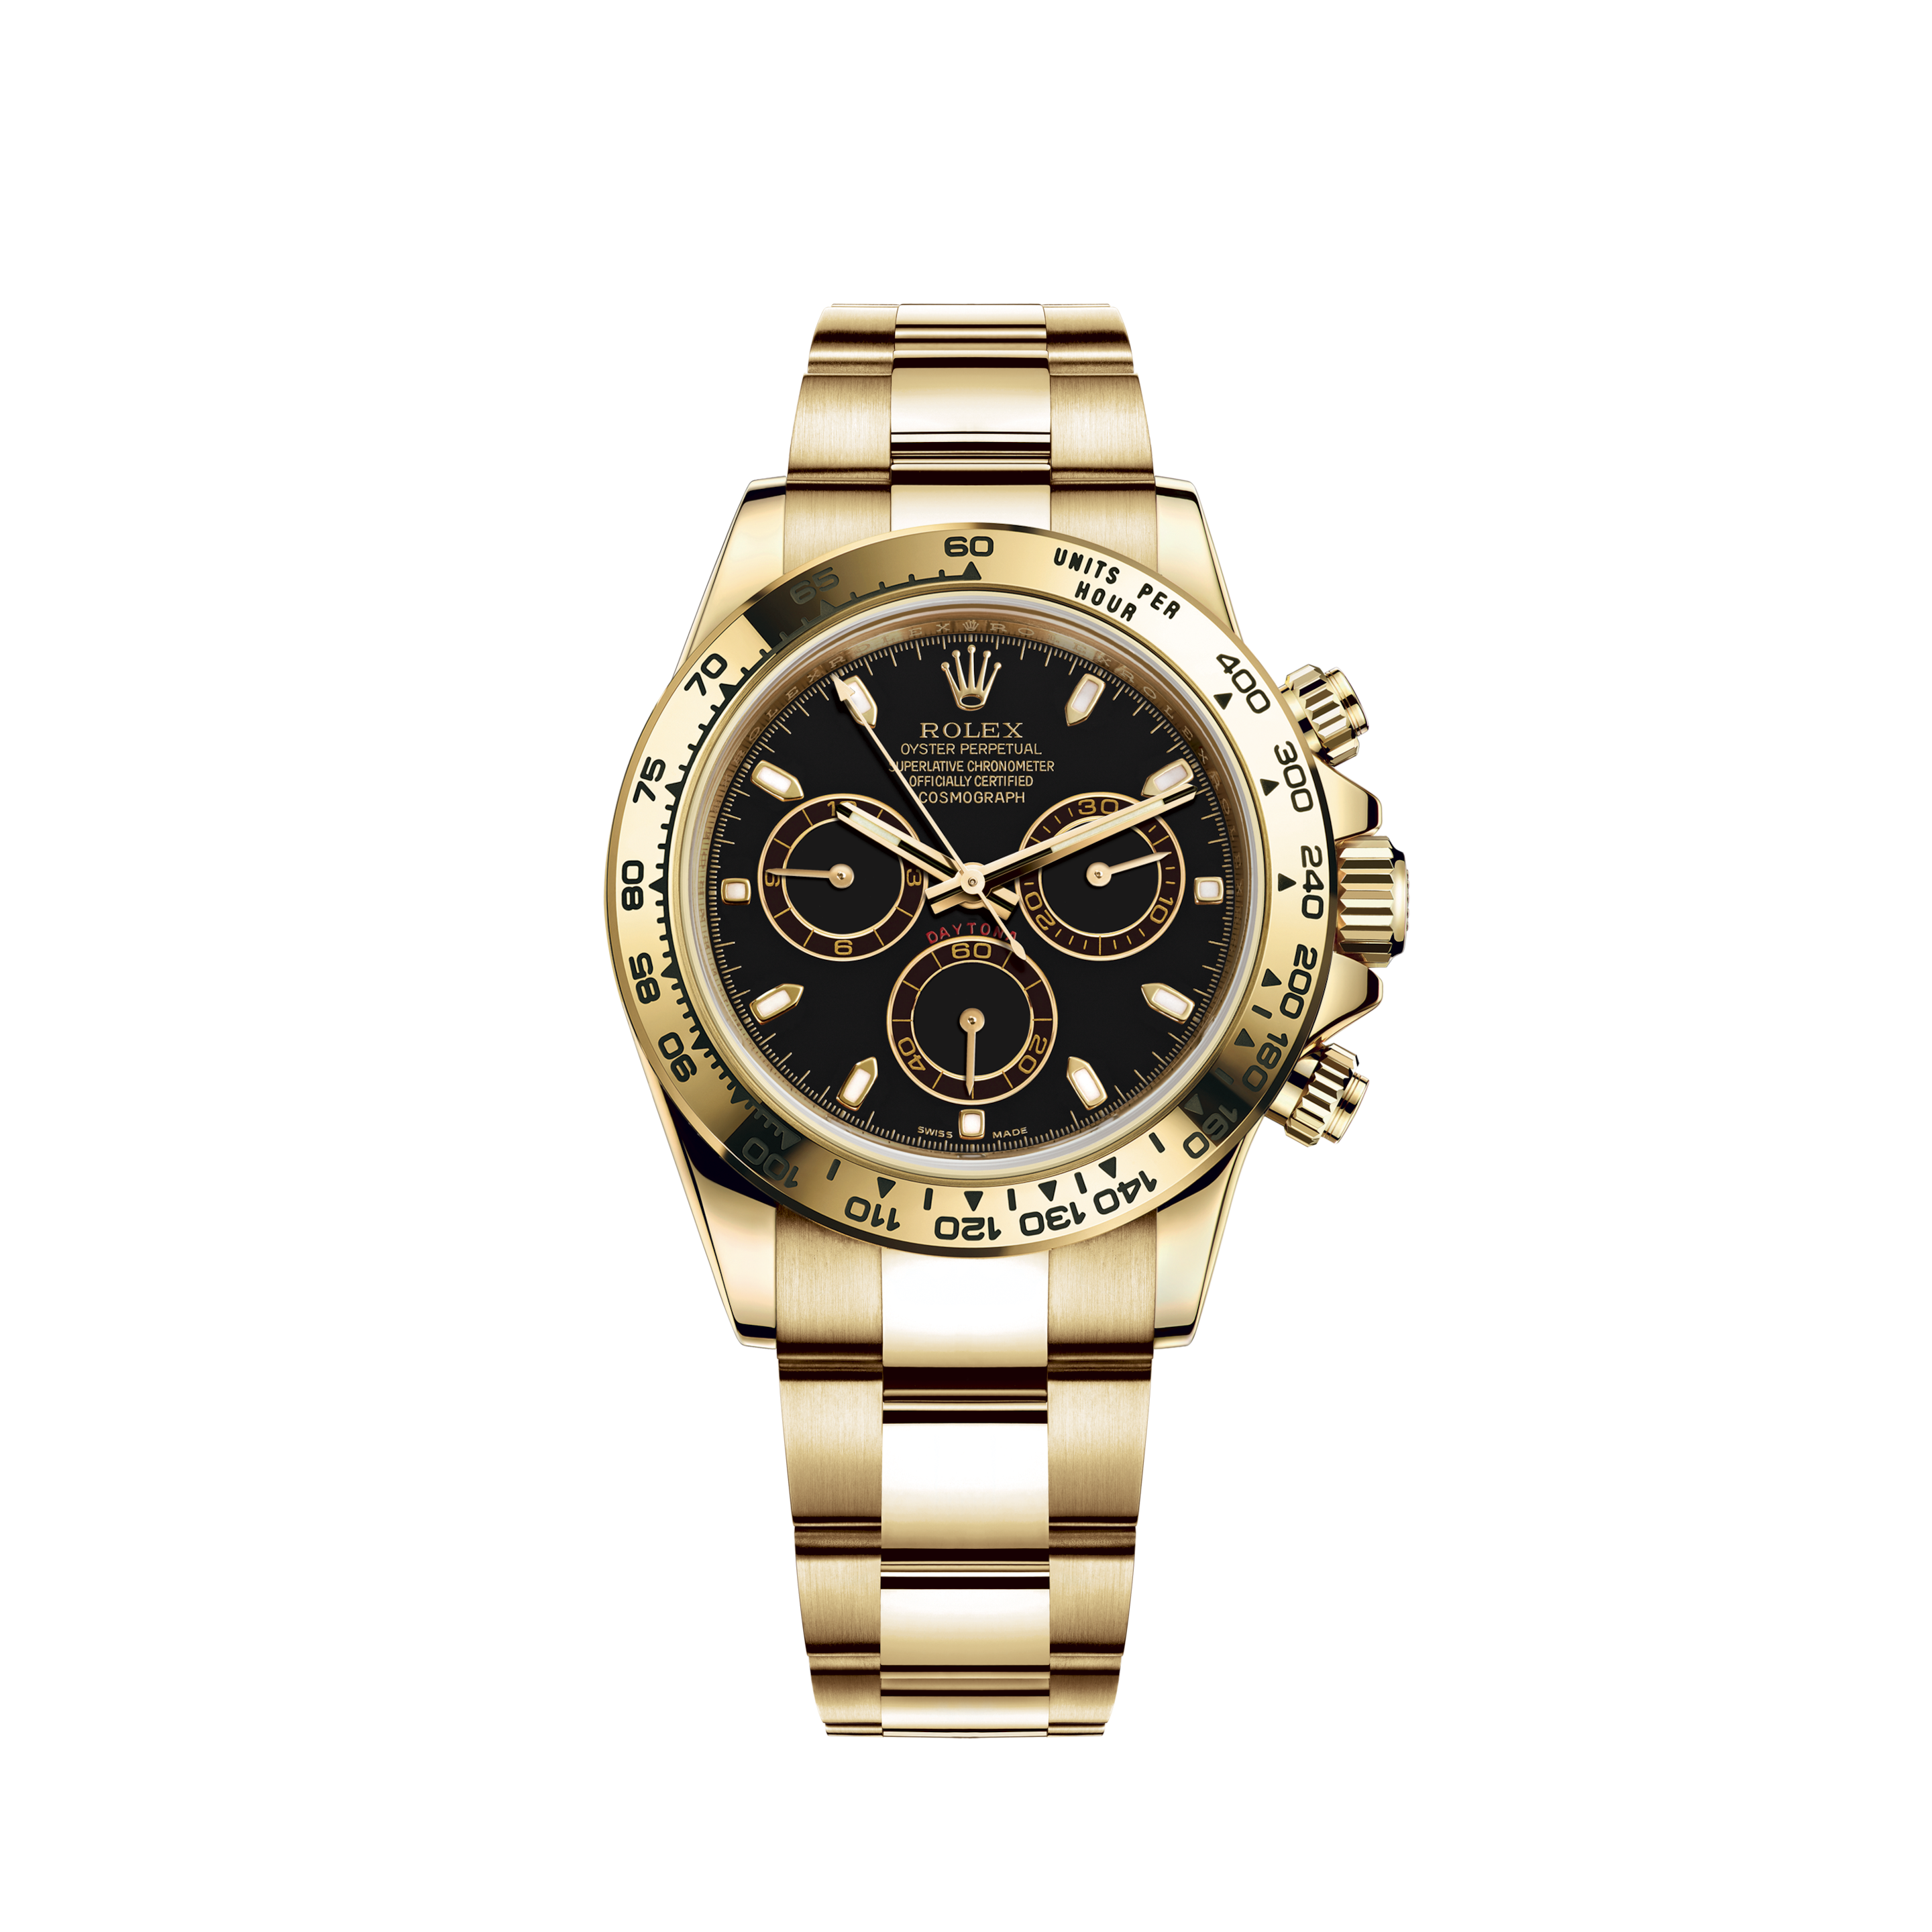 Rolex Datejust 16014 TAPESTRY DIAL